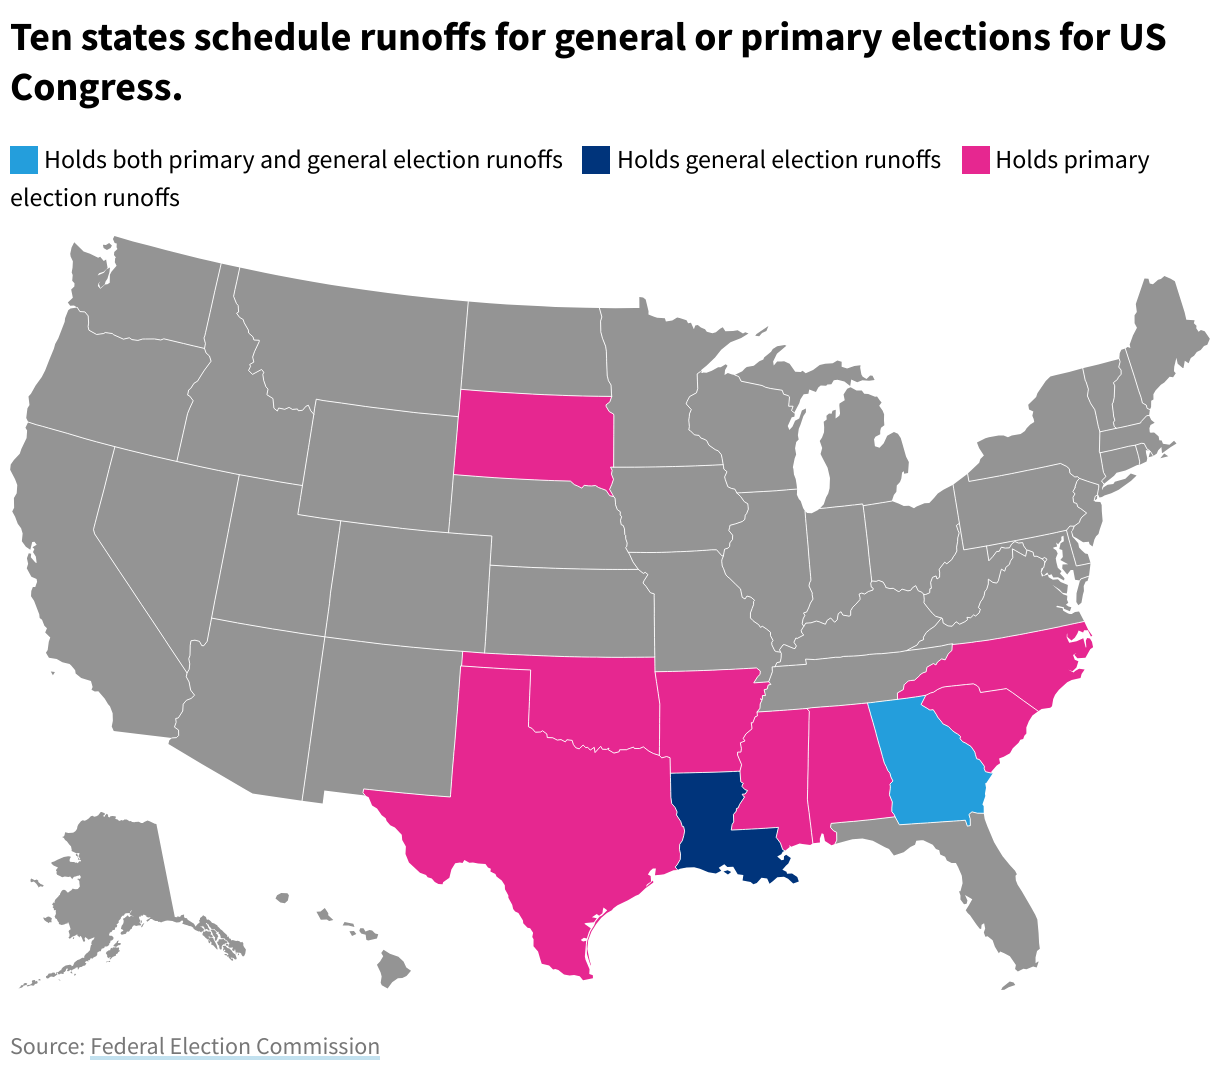 A map showing which states hold election runoffs for primaries and general elections.